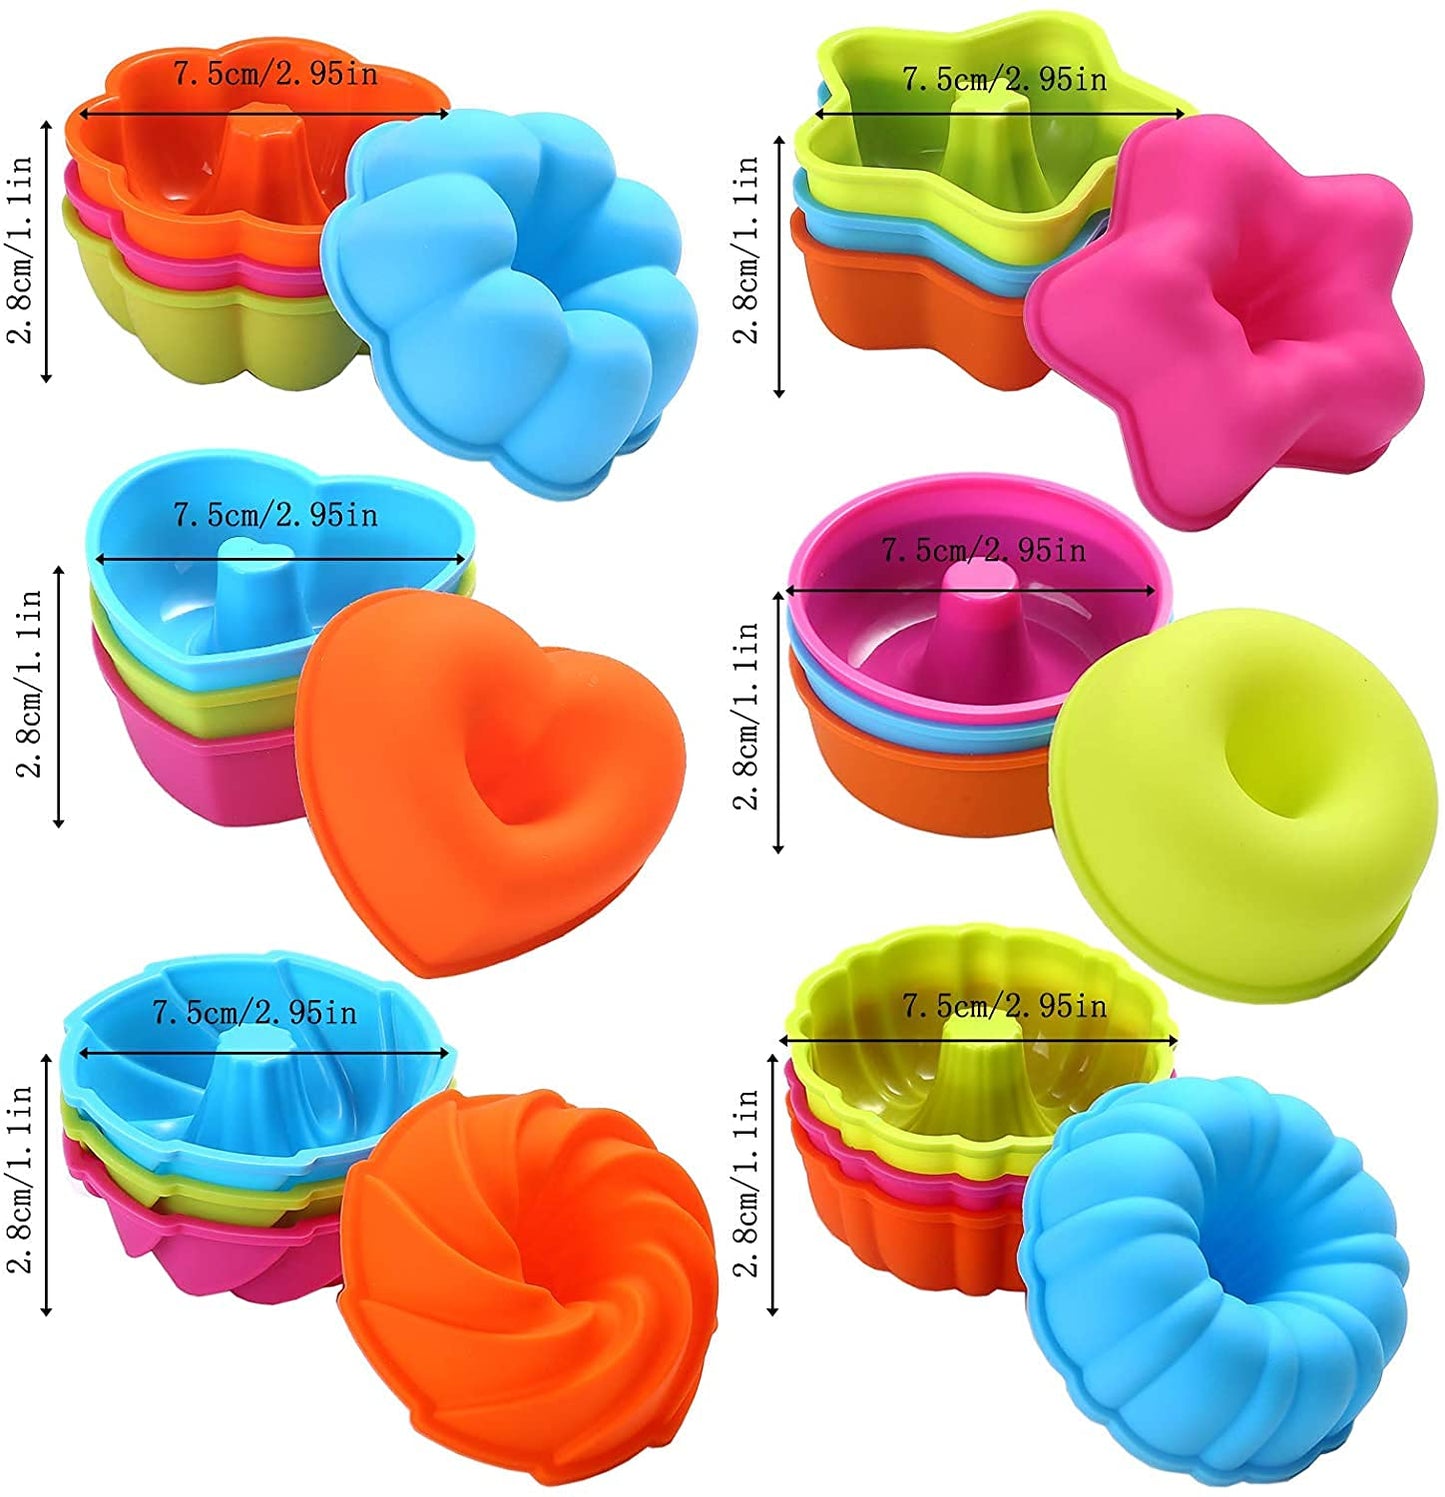 DOCOSS Pack Of 18 Premium Muffin Mould Silicone Cupcake moulds for Microwave Oven Donut Moulds /Silicon Muffin Cup Cake Mold Set For Cake ,Jelly, Baking (Multicolour)